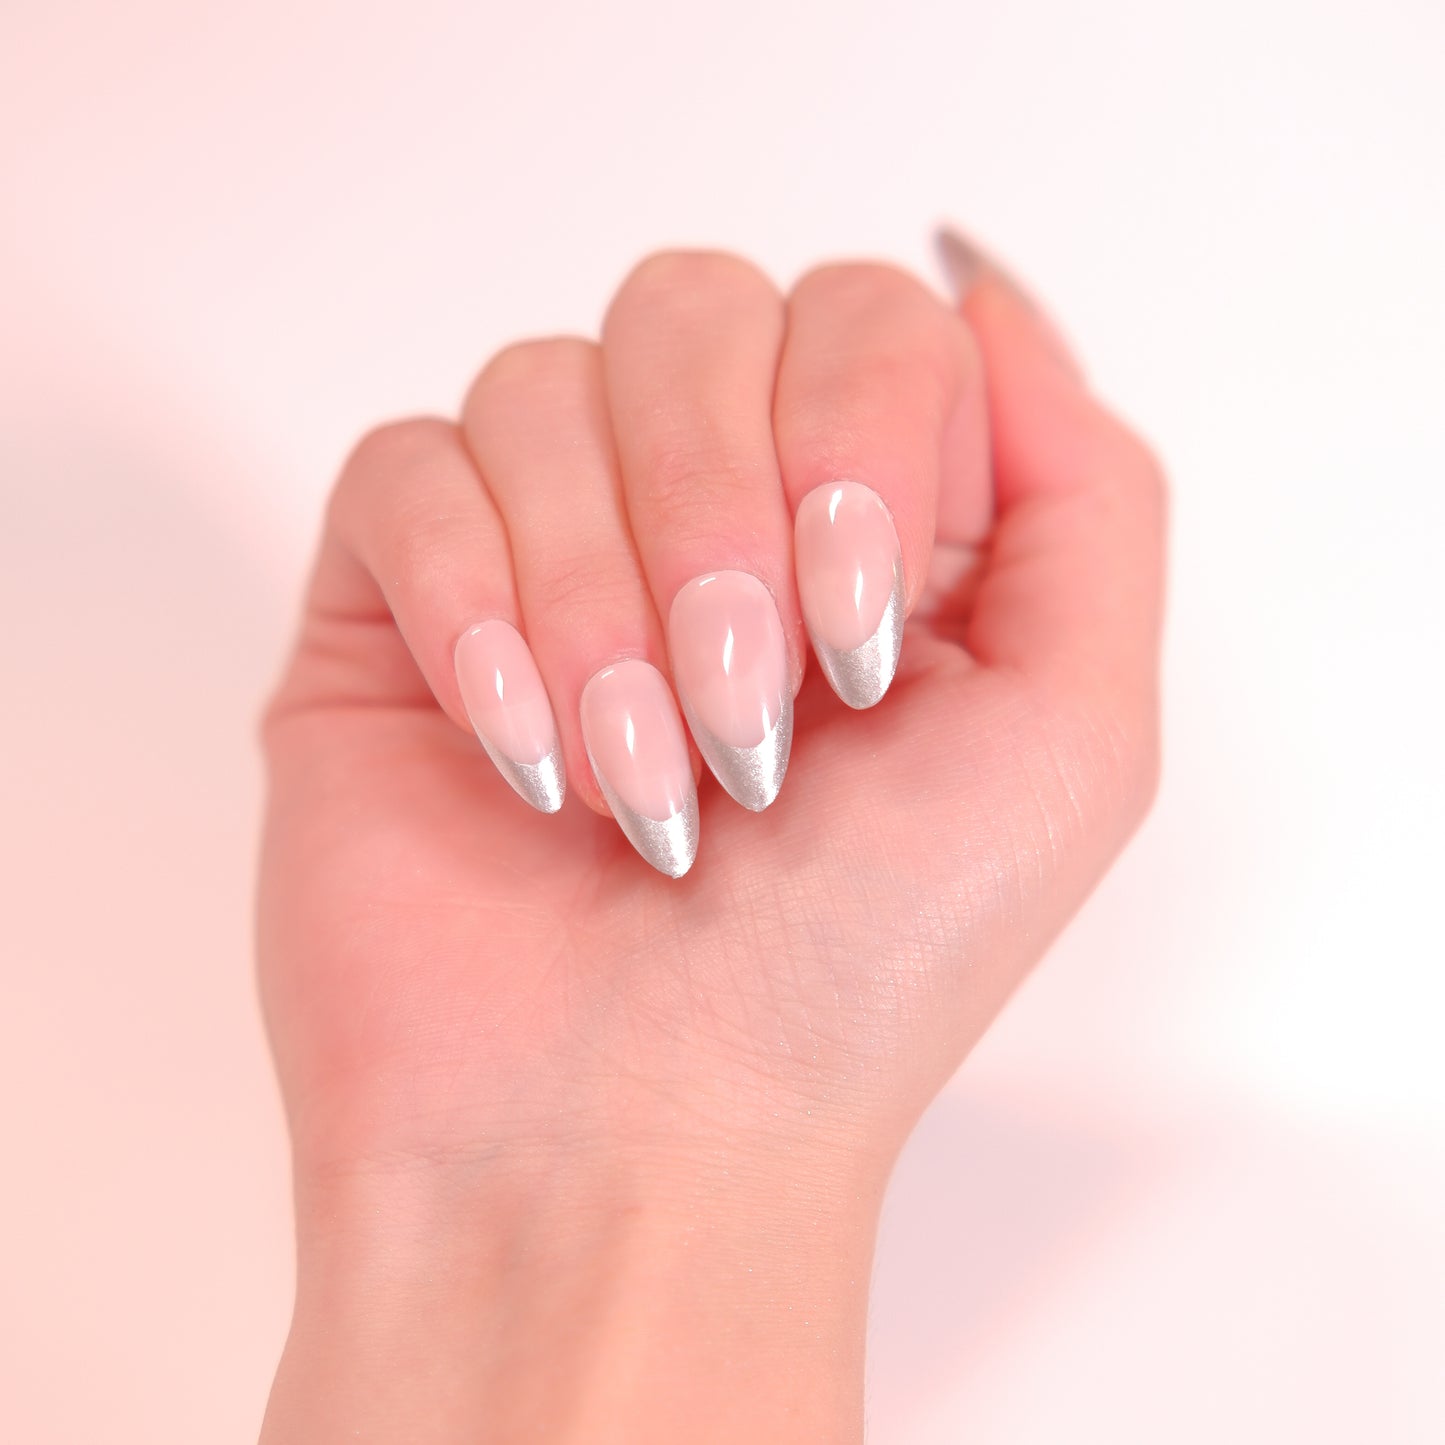 Silver French tip nails